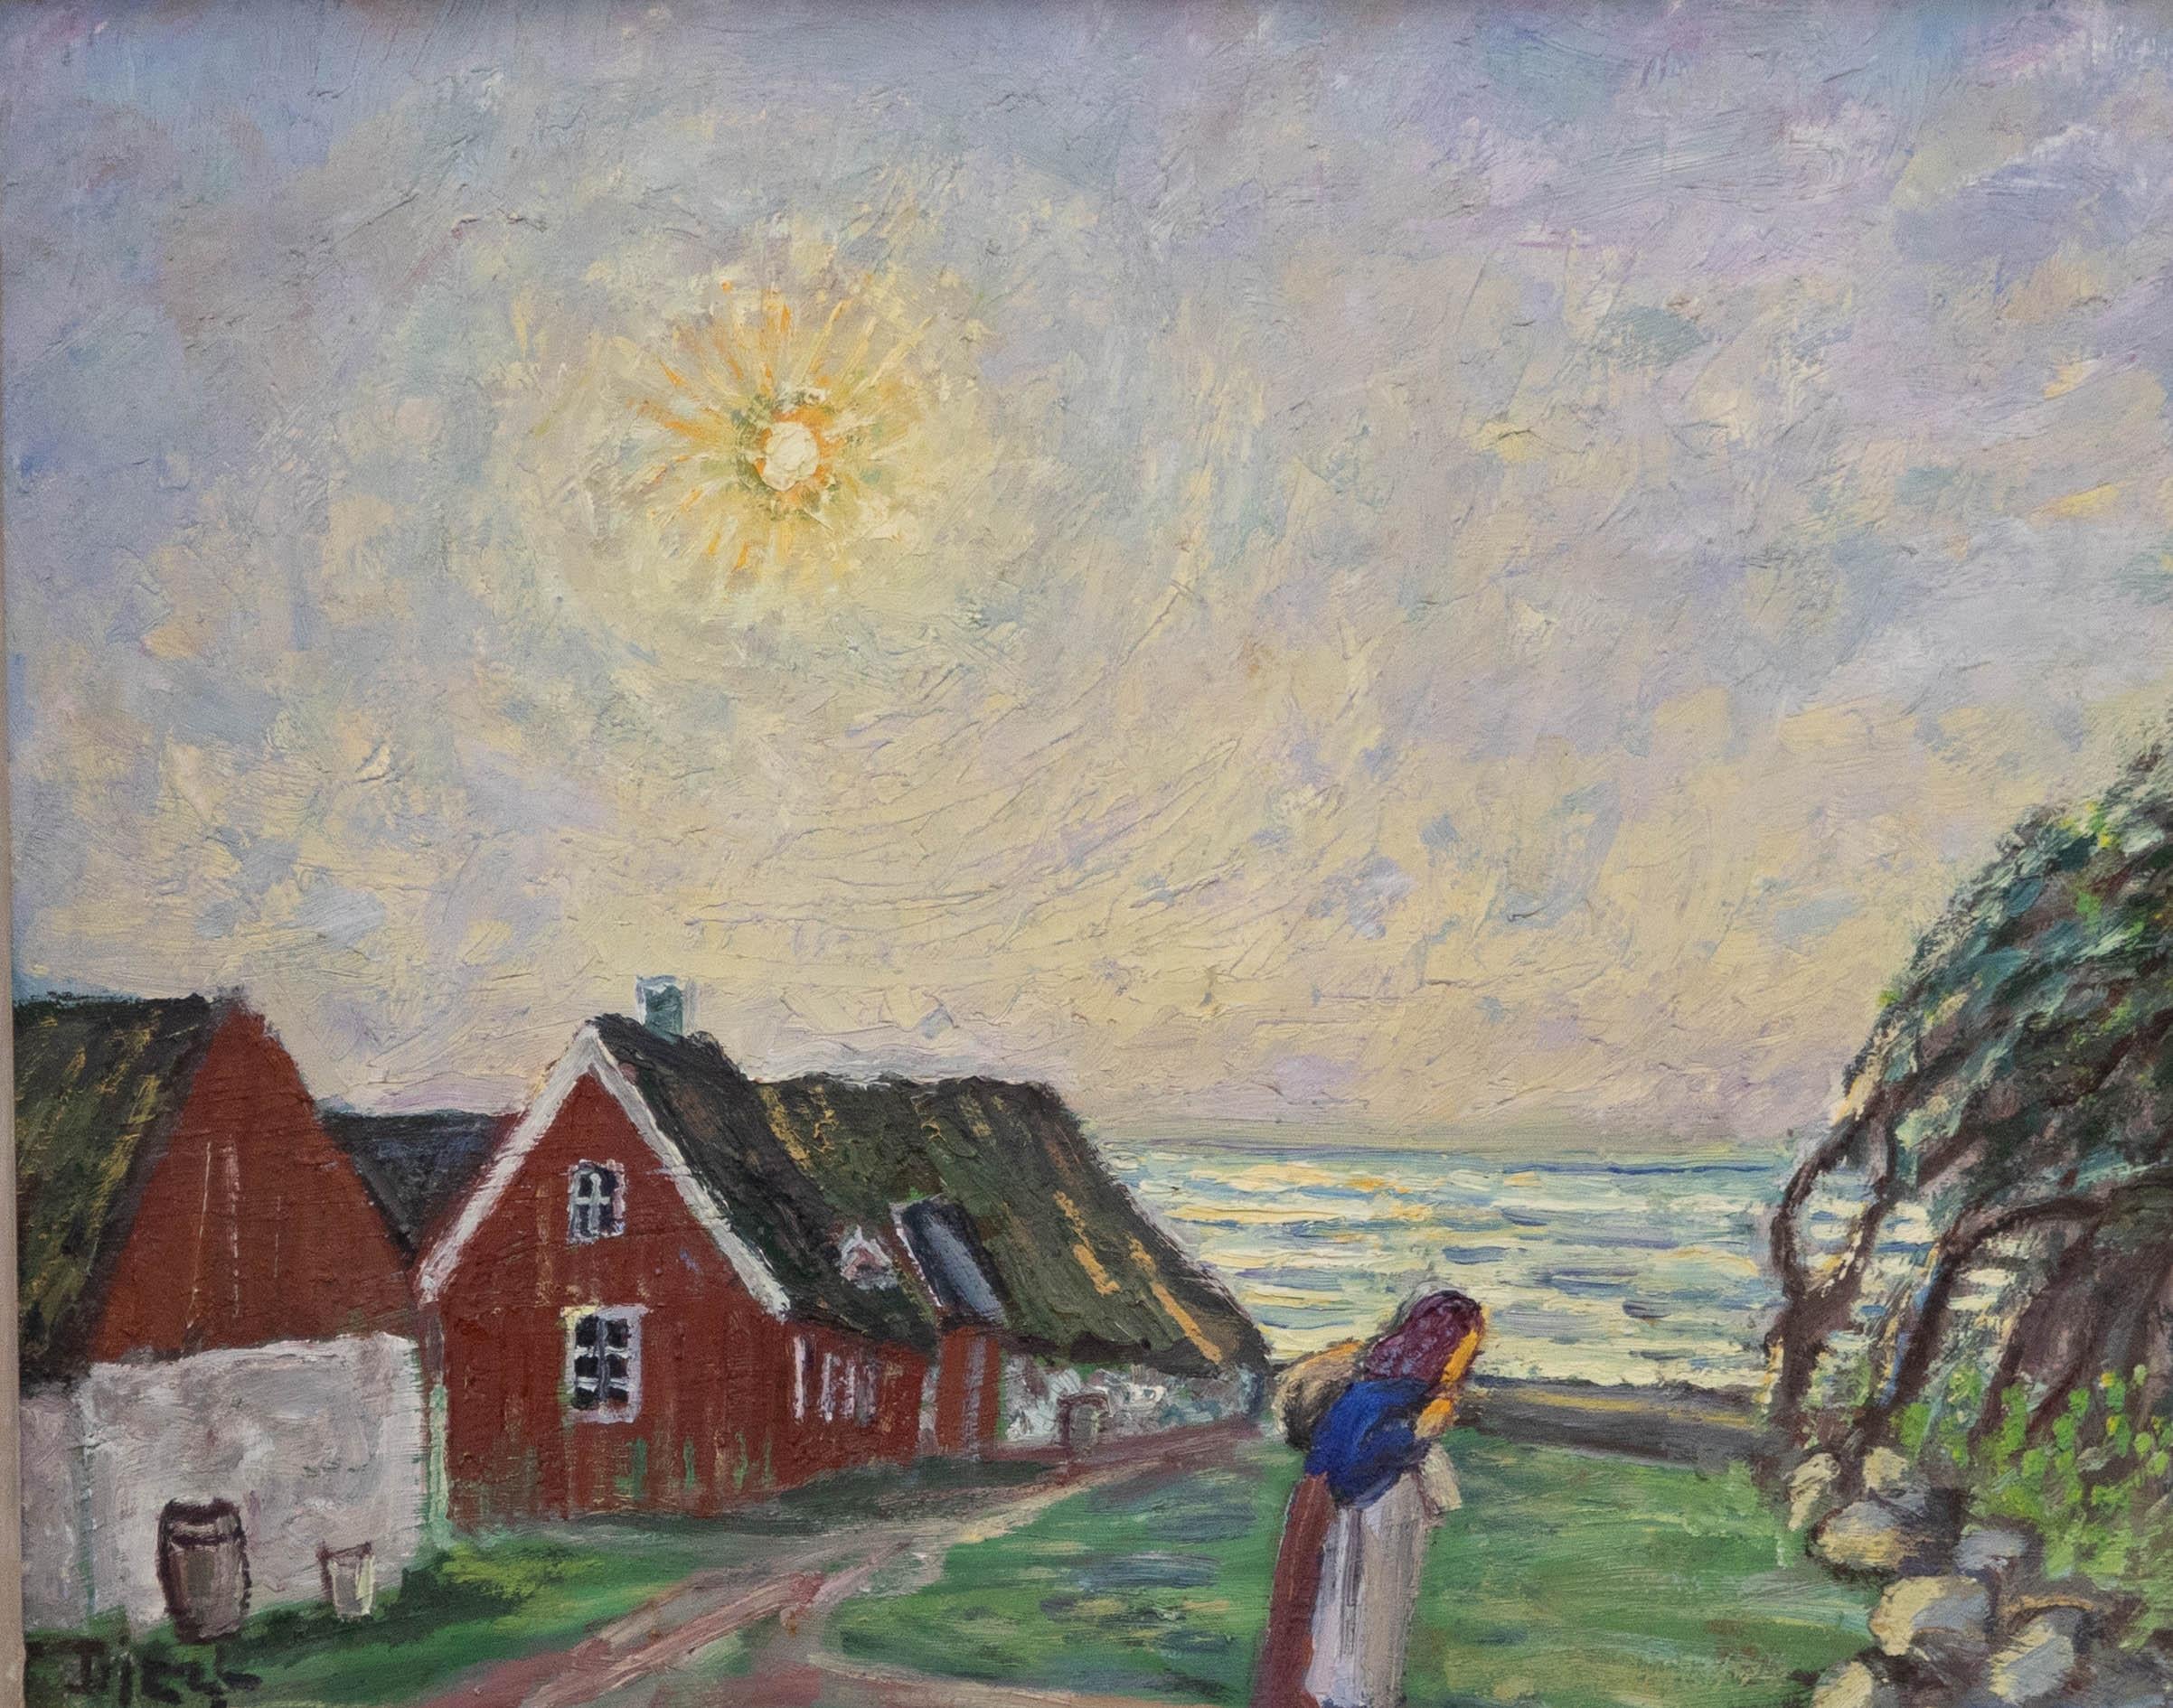 Otto Djerf (1868-1954) - Mid 20th Century Oil, Sunshine over Coastal Village - Painting by Unknown